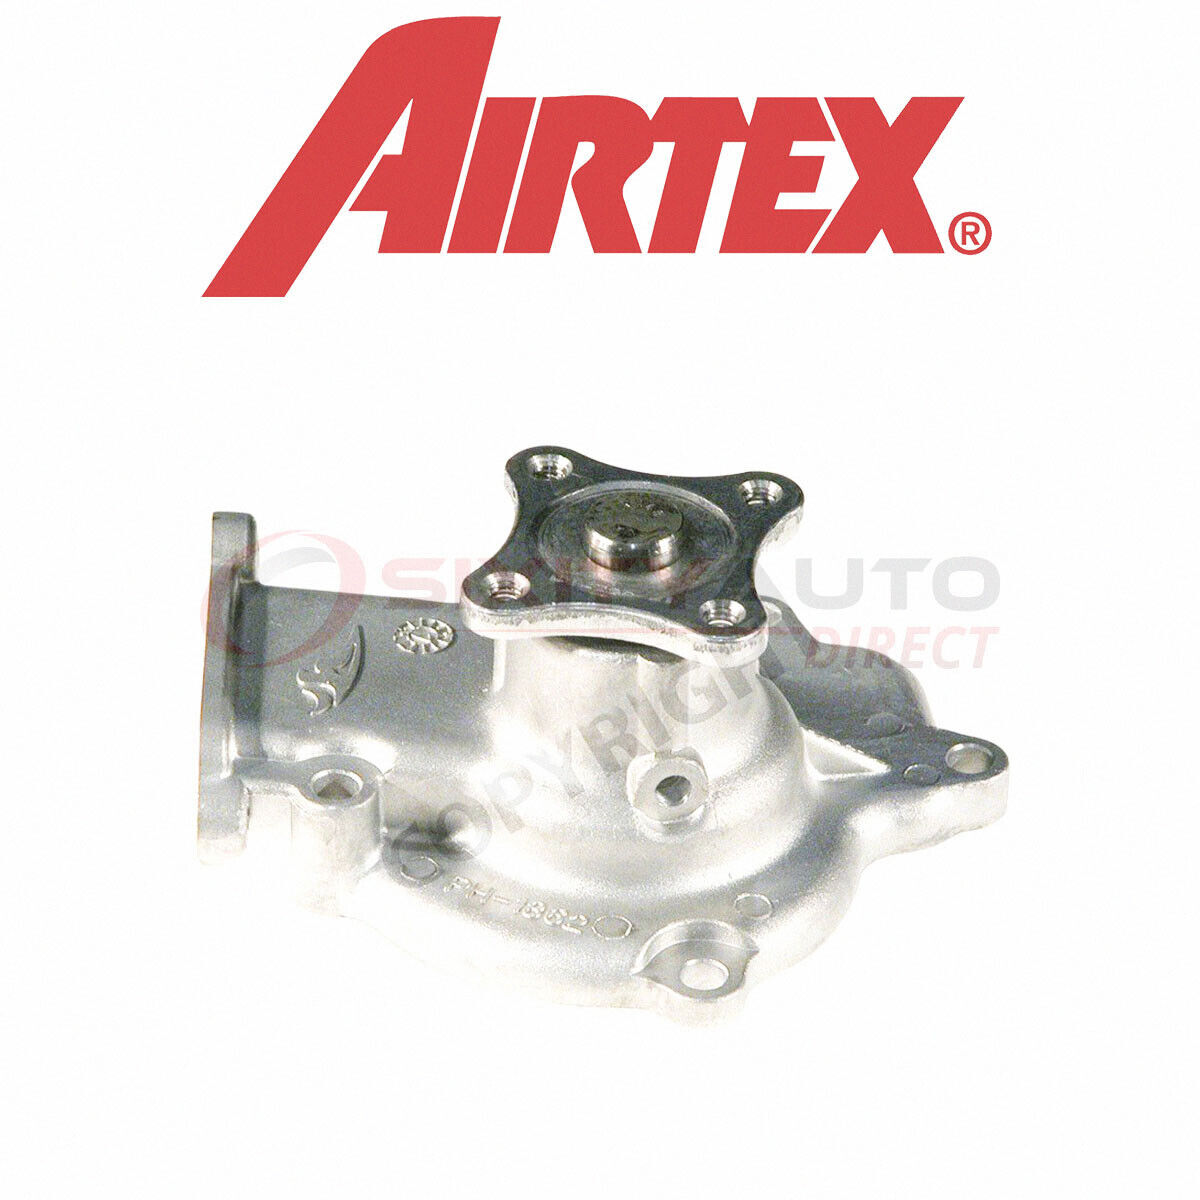 Airtex AW9214 Engine Water Pump for YH-N112 WPN001 WP640 WP-862 WH8018 W862M jg